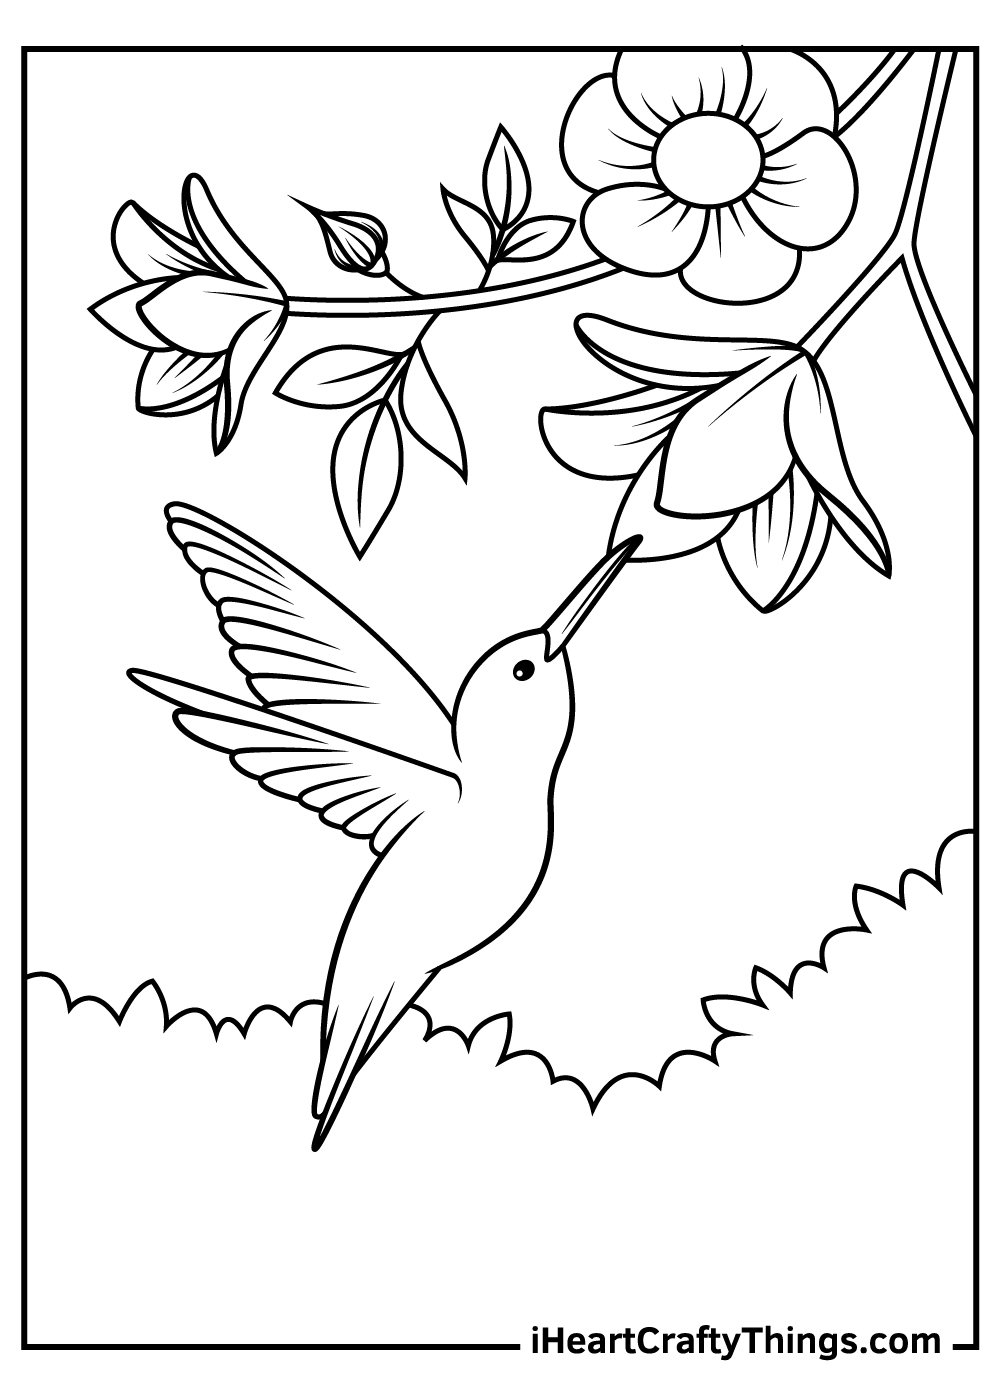 Hummingbird coloring pages free printables